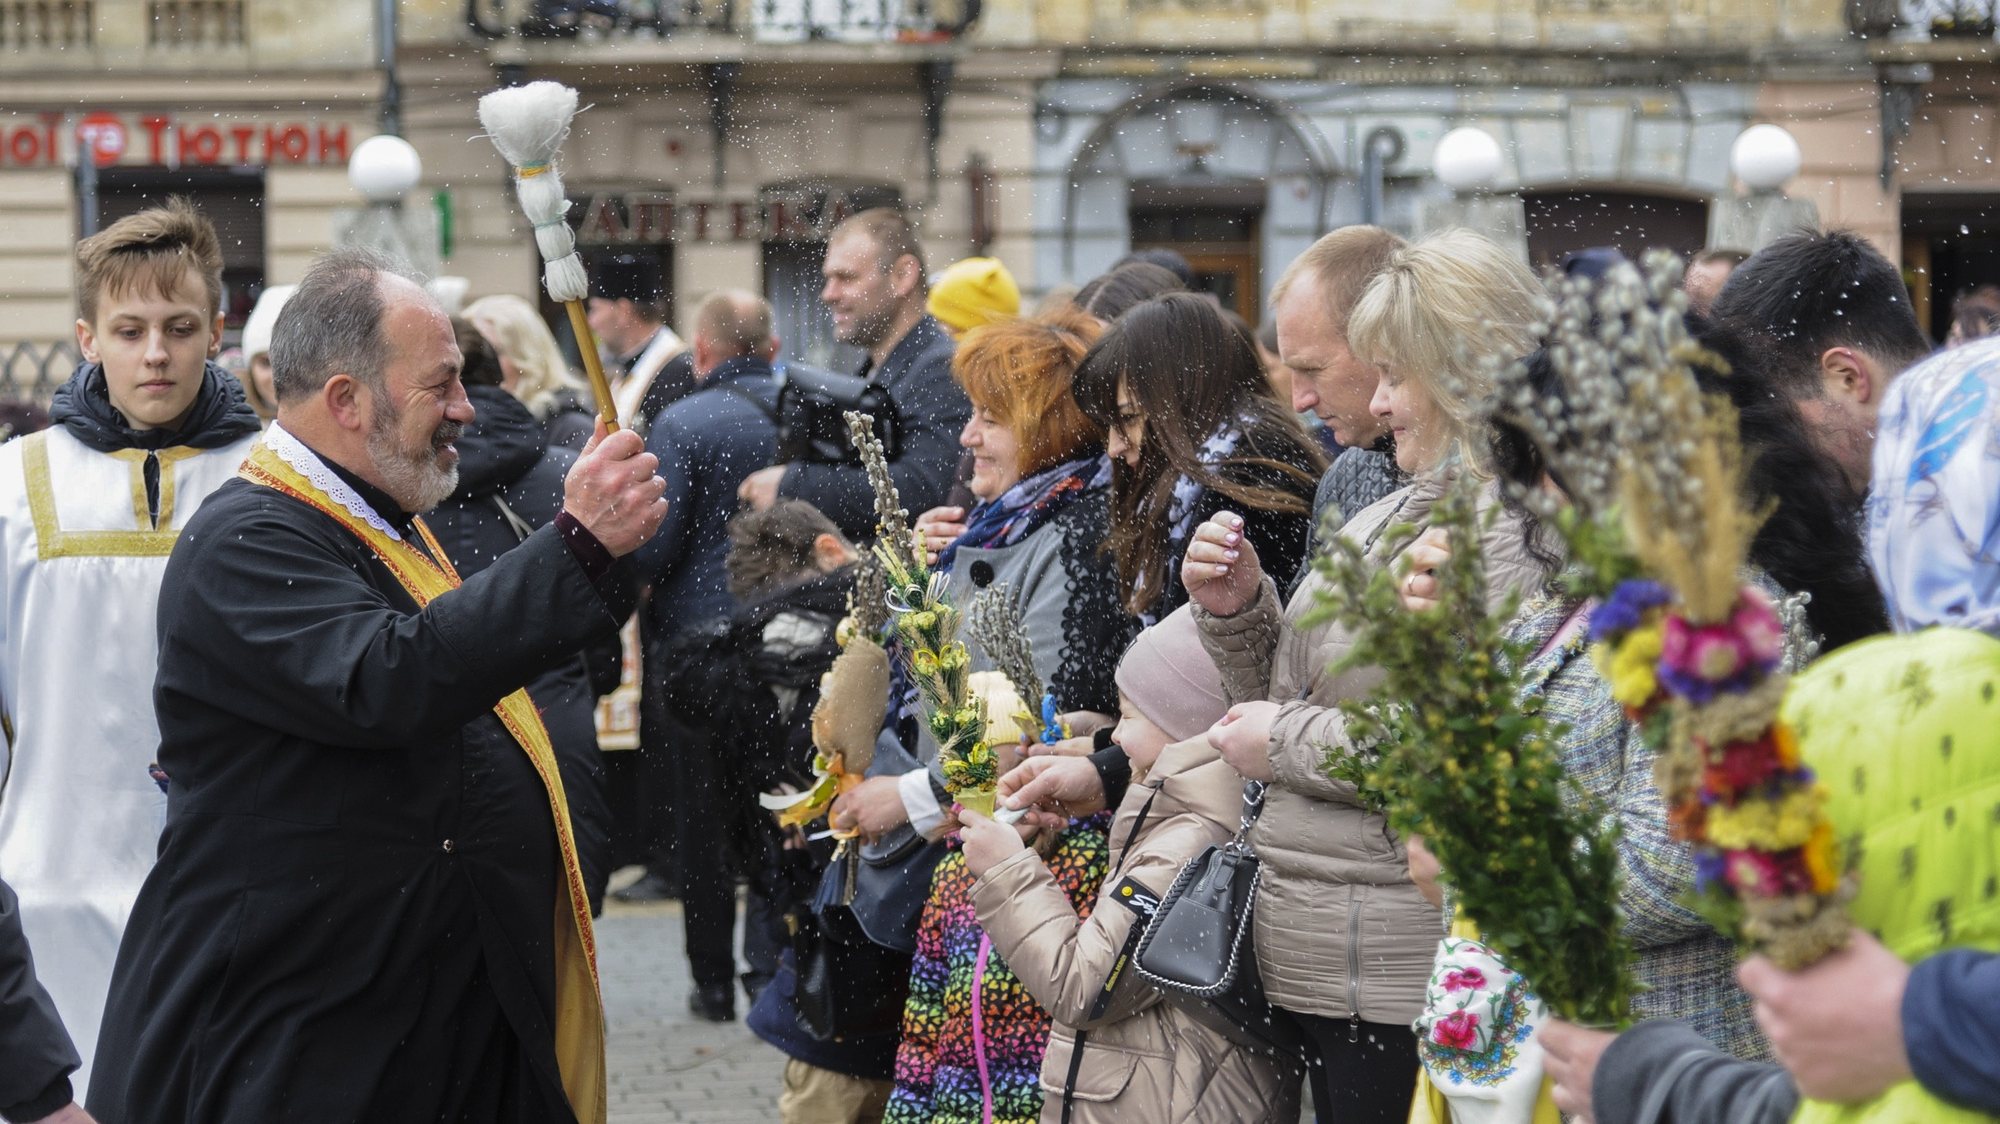 epa09894480 A Christian Orthodox priest blesses Ukrainian believers who hold pussy-willow branches as they celebrate Palm Sunday in the Western Ukrainian city of Lviv, 17 April 2022, amid the Russian invasion. Palm Sunday is the first day of Holy Week and the Sunday before Easter, commemorating the Entrance of the Jesus Christ’s into Jerusalem. Russian troops entered Ukraine on 24 February resulting in fighting and destruction in the country and triggering a series of severe economic sanctions on Russia by Western countries.  EPA/MYKOLA TYS